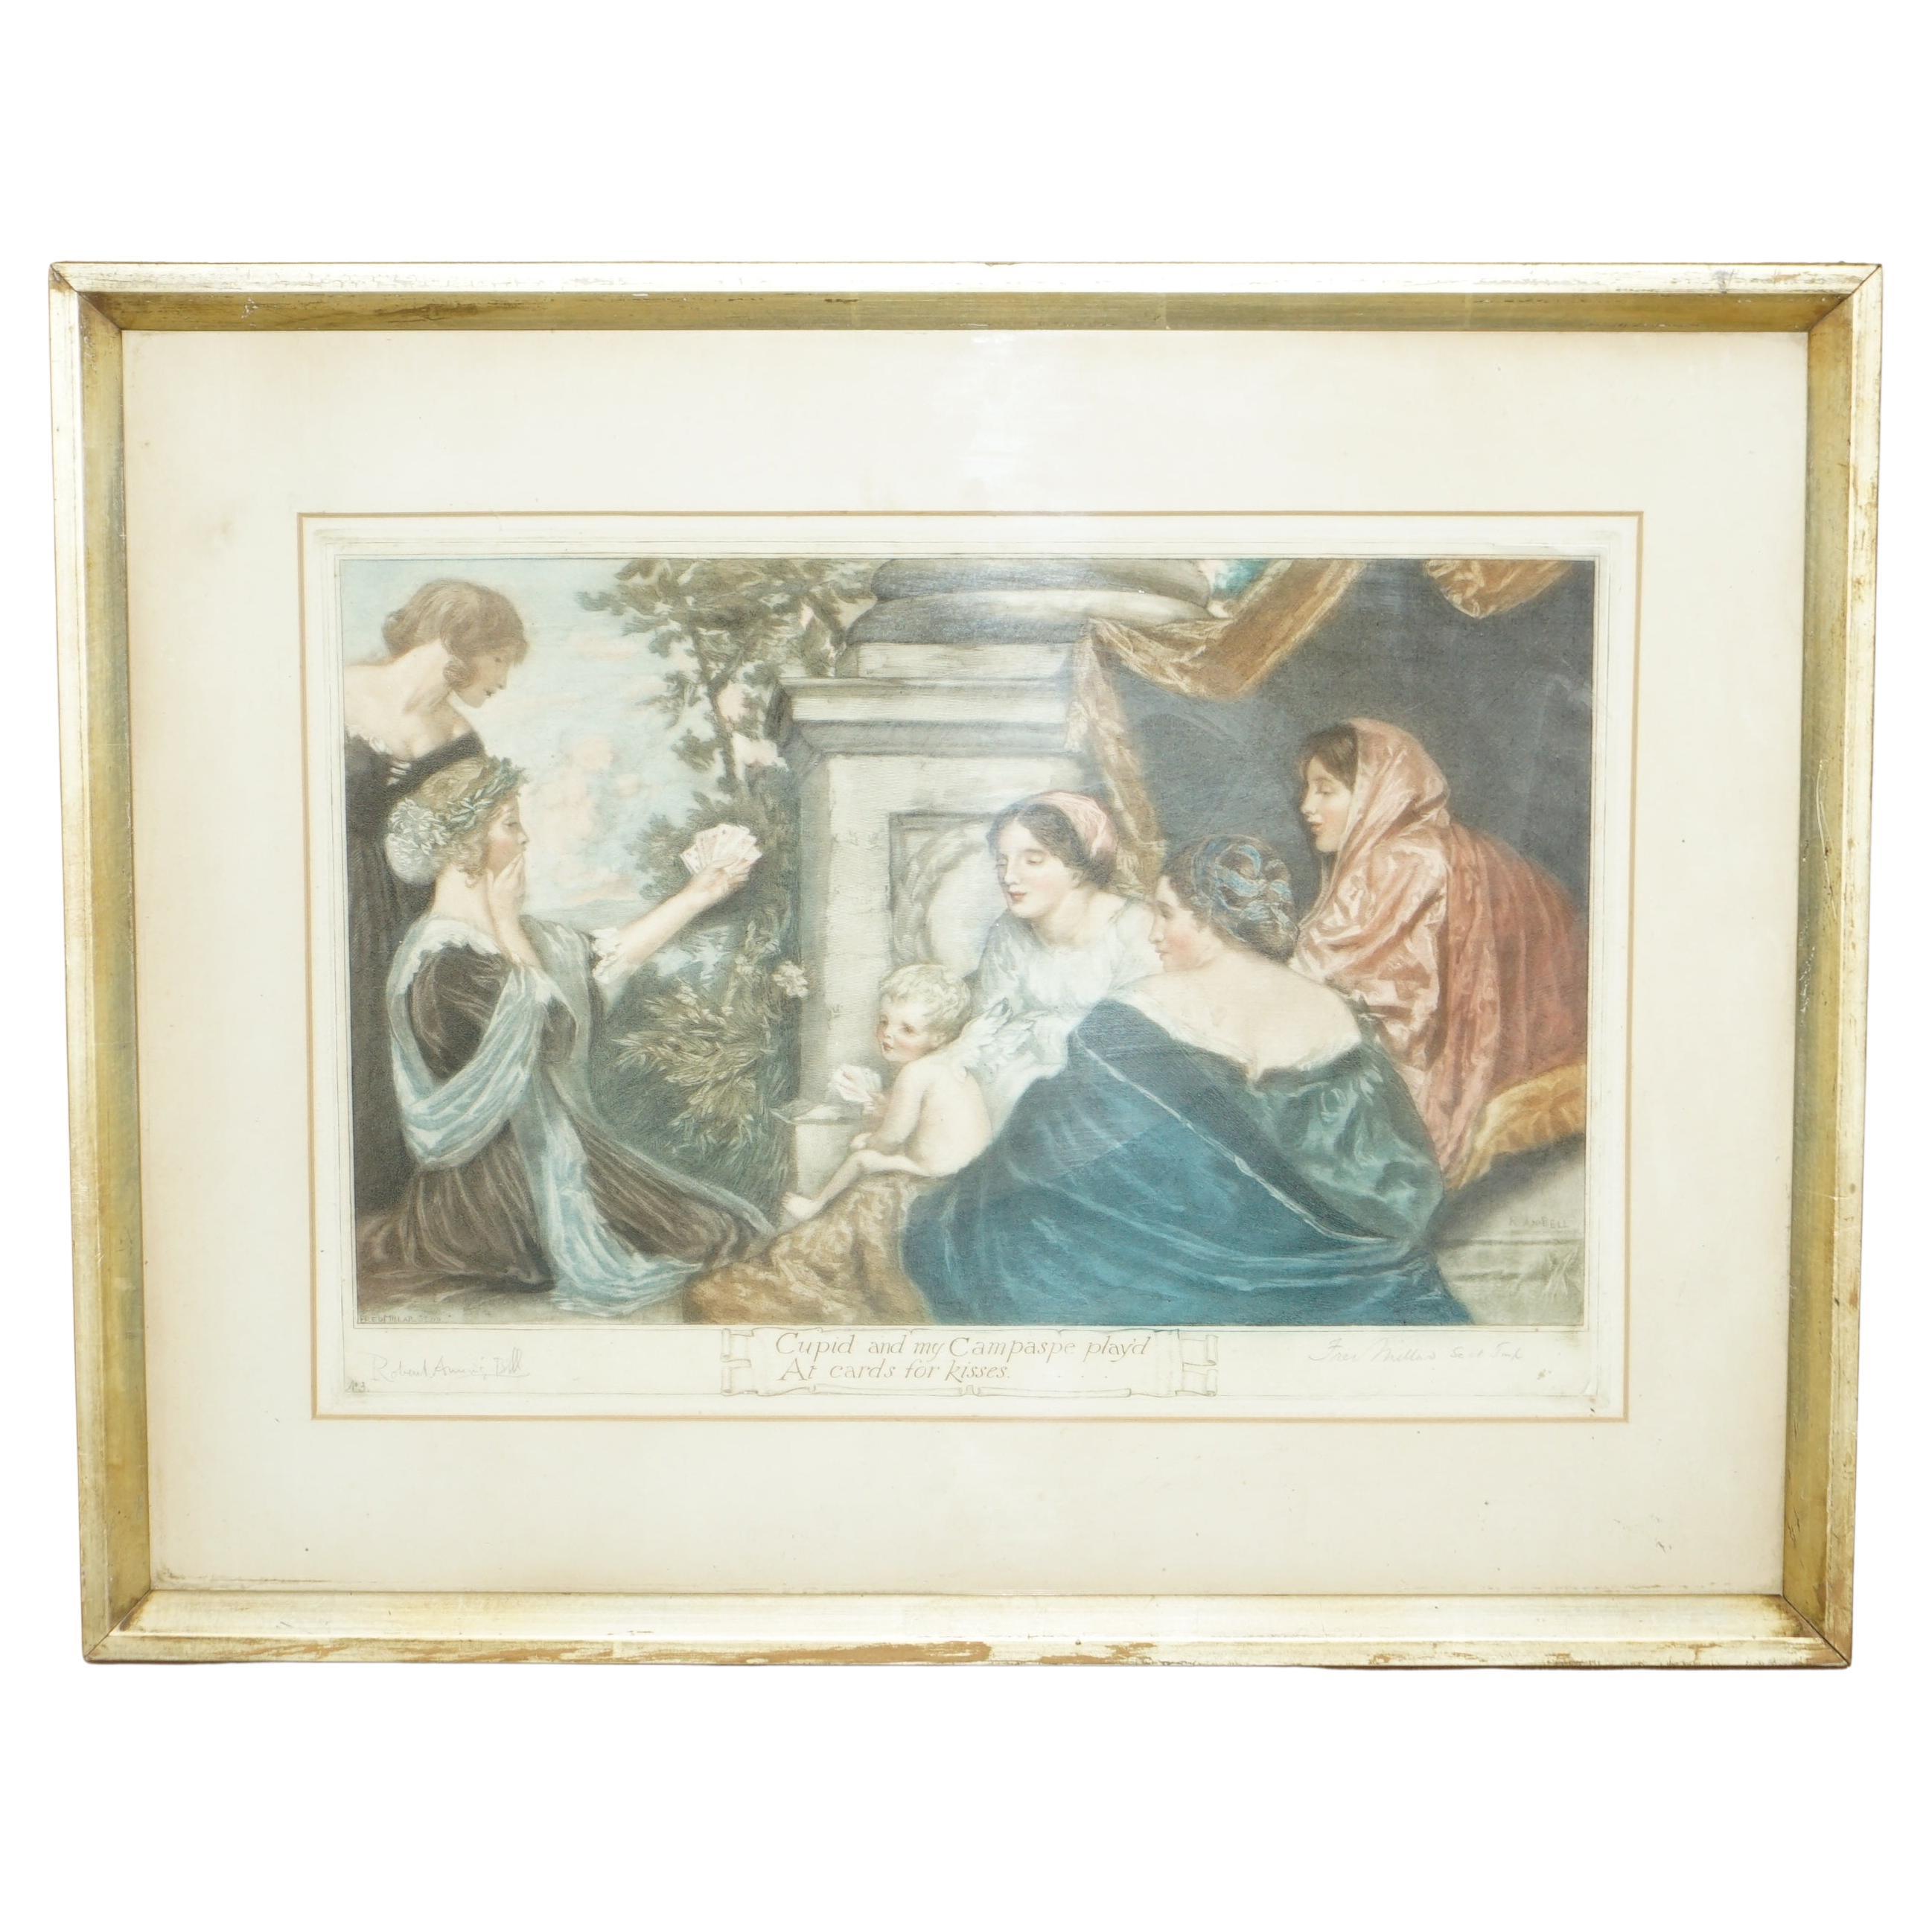 Robert Bell Fred Millar Watercolour Print Cupid and My Campaspe Play'd Cards For Sale